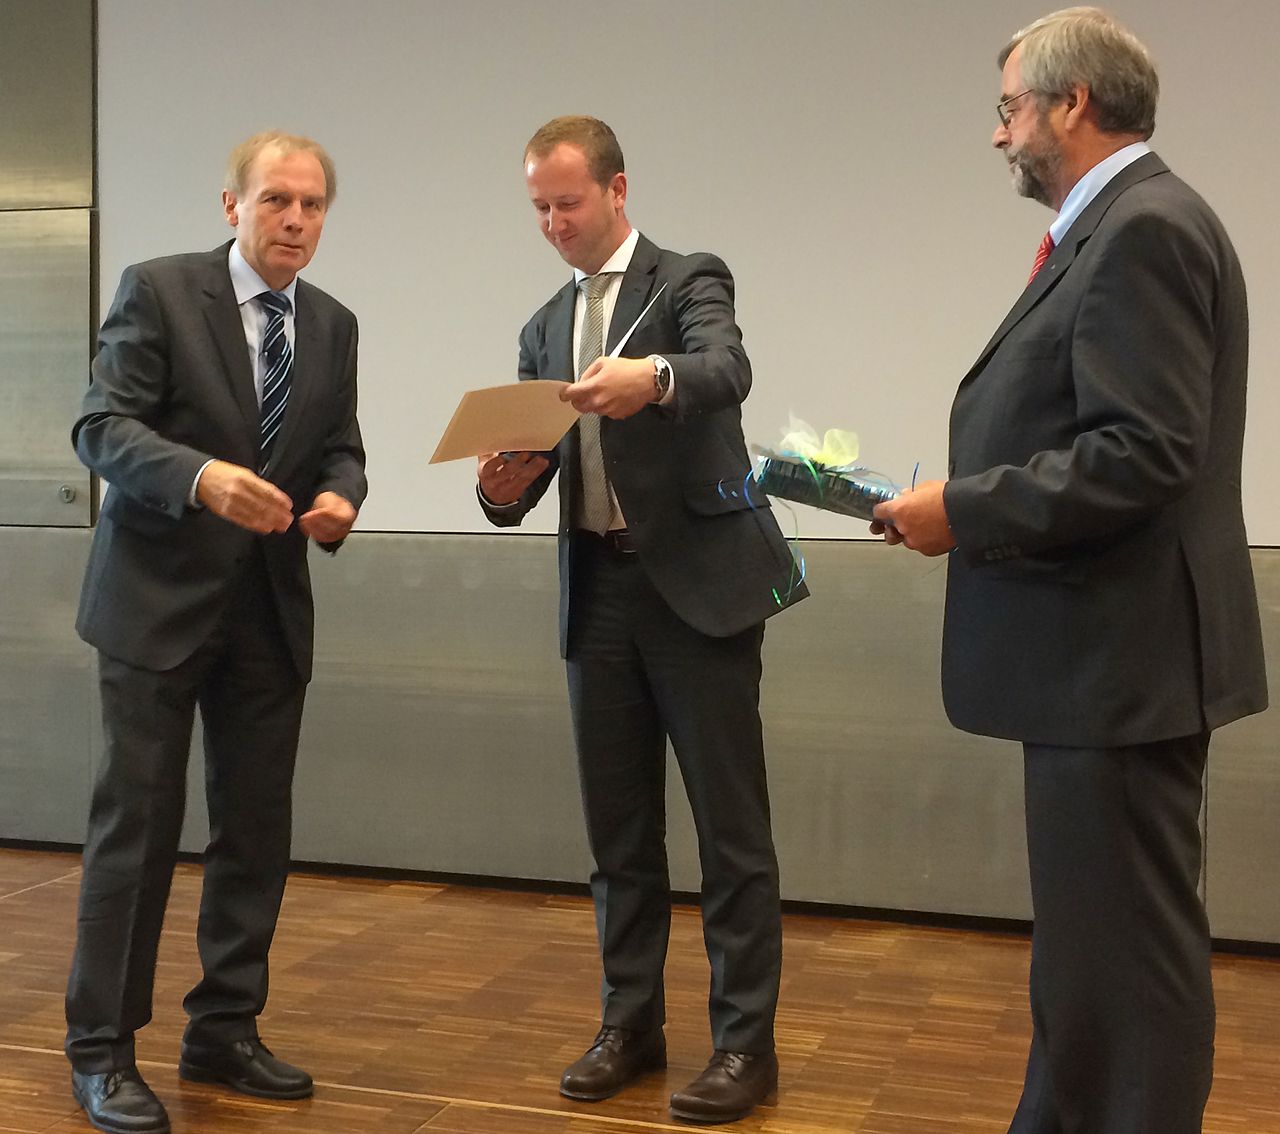 Best doctoral thesis price awarded to Dr. Andrea Tautzenberger